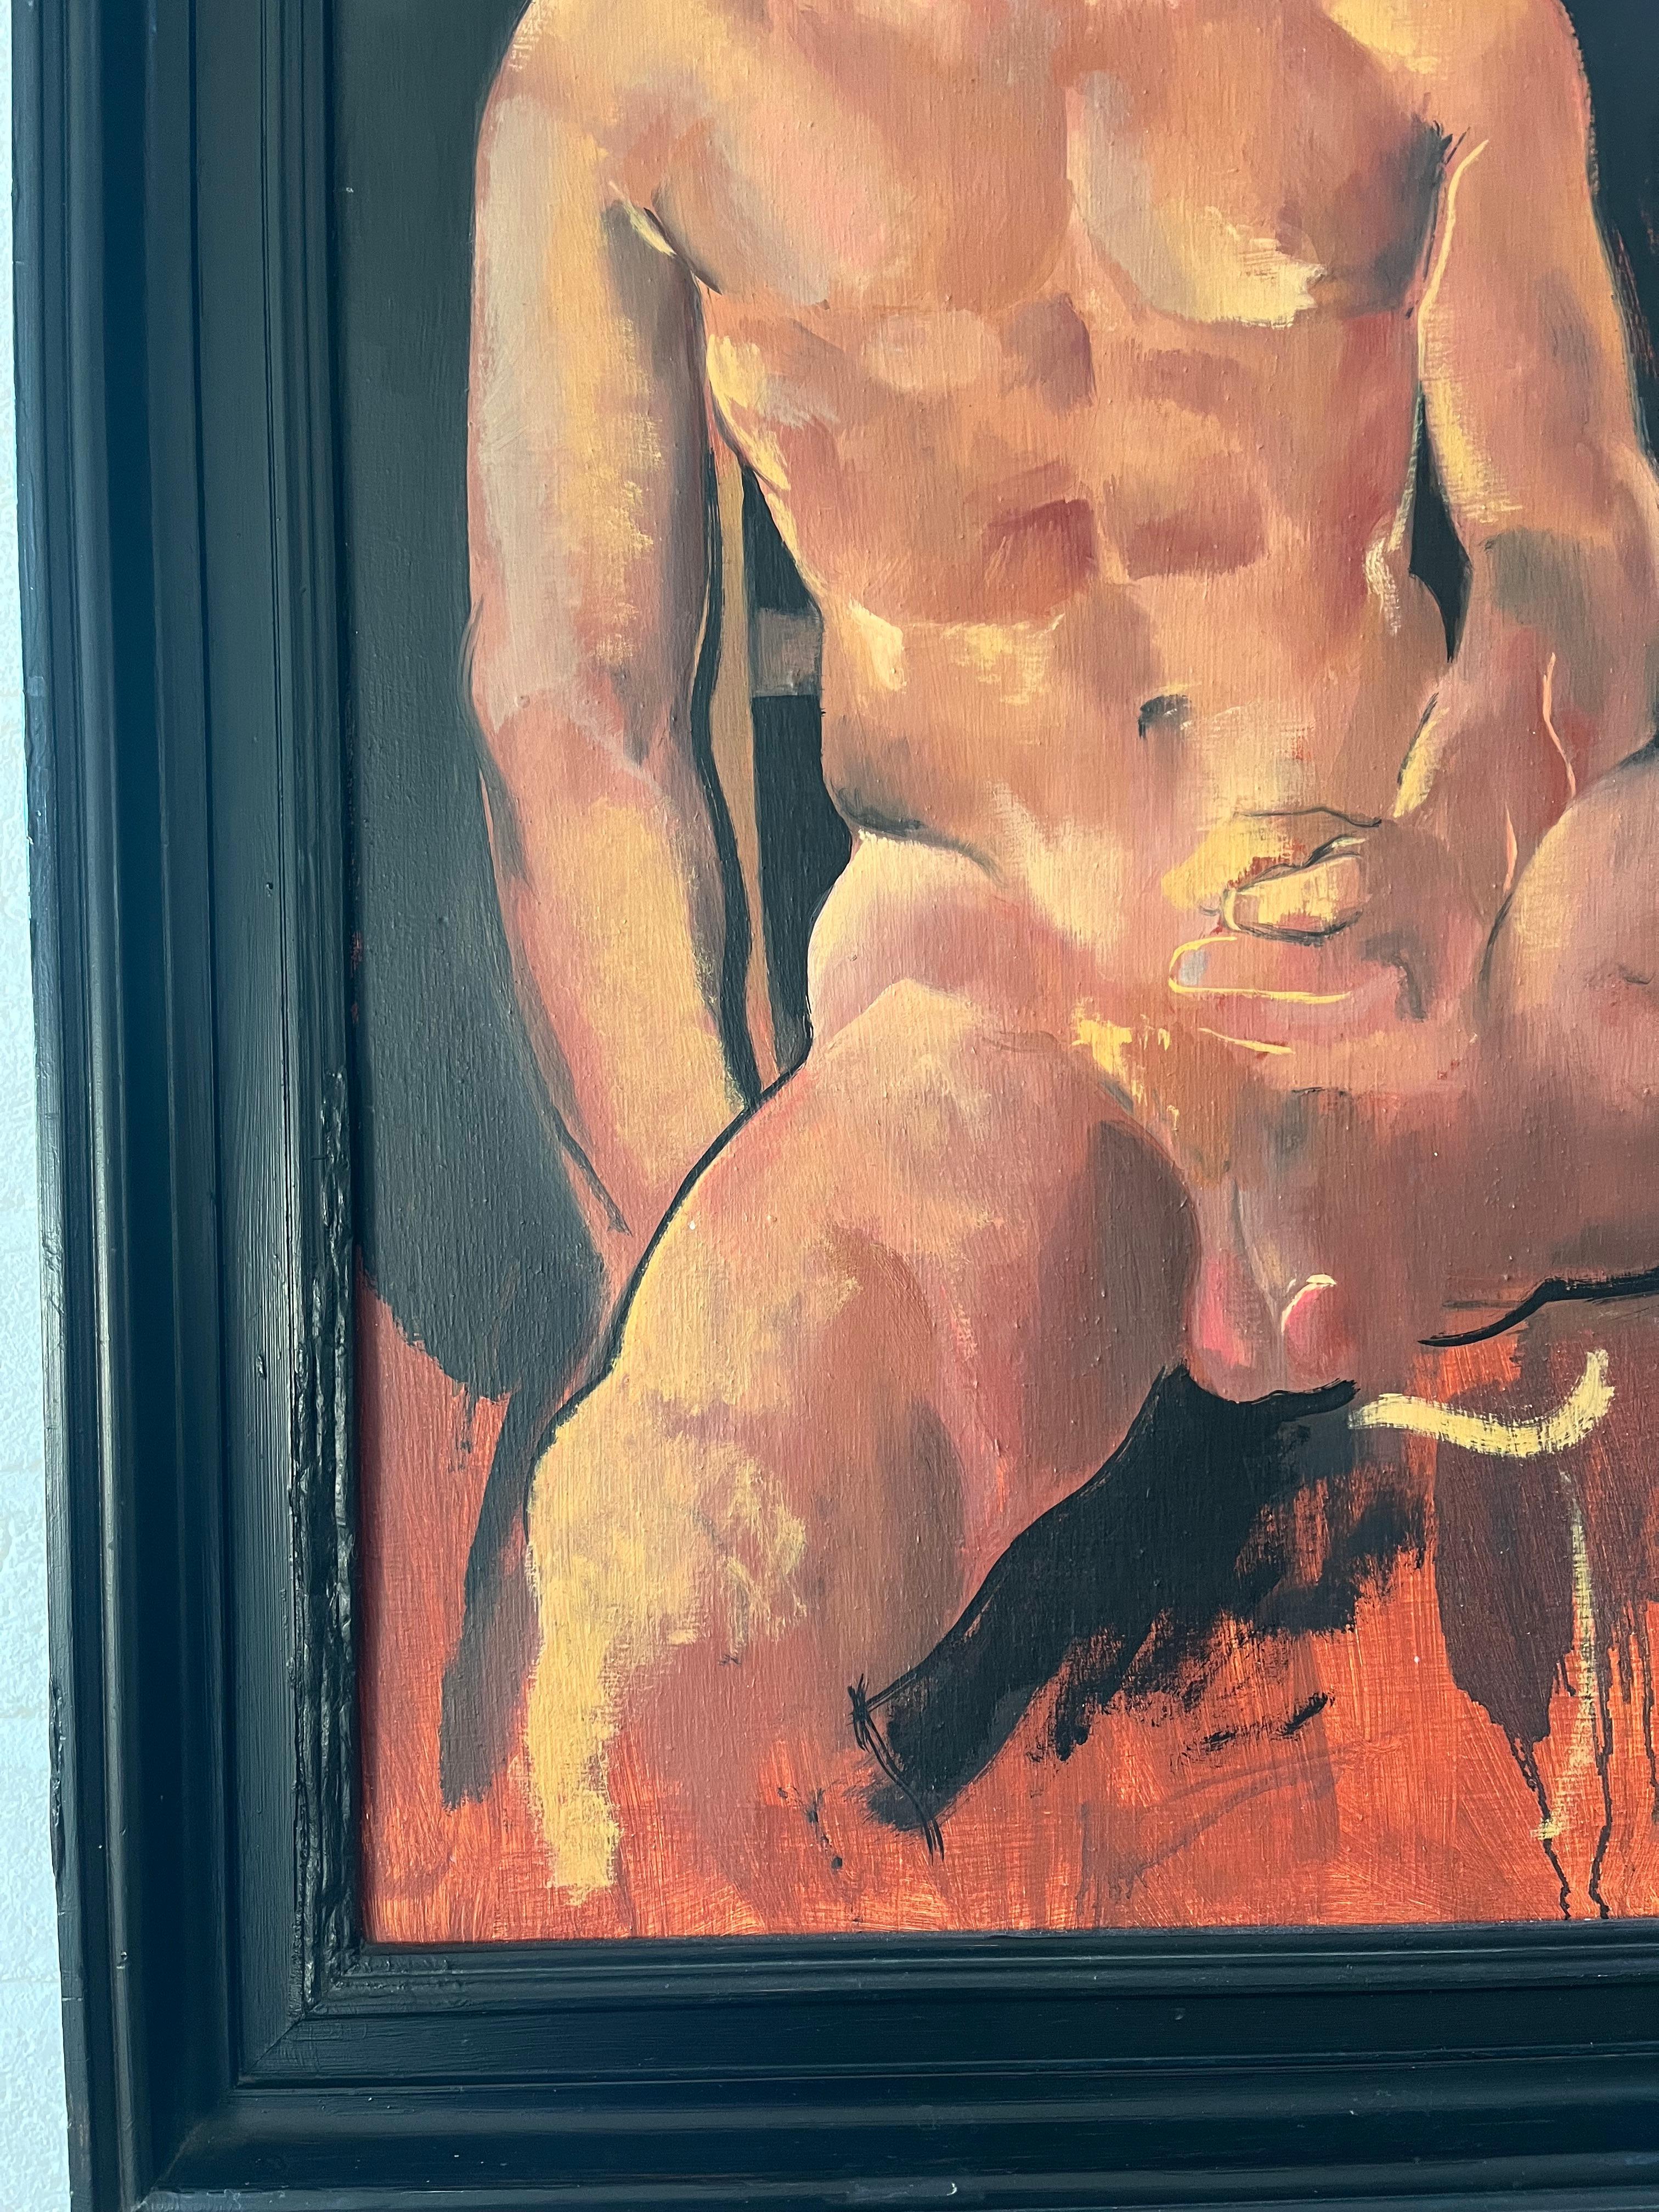 1980s Erotic nude male portrait of artist's lover, Iconic piece from gay history For Sale 2